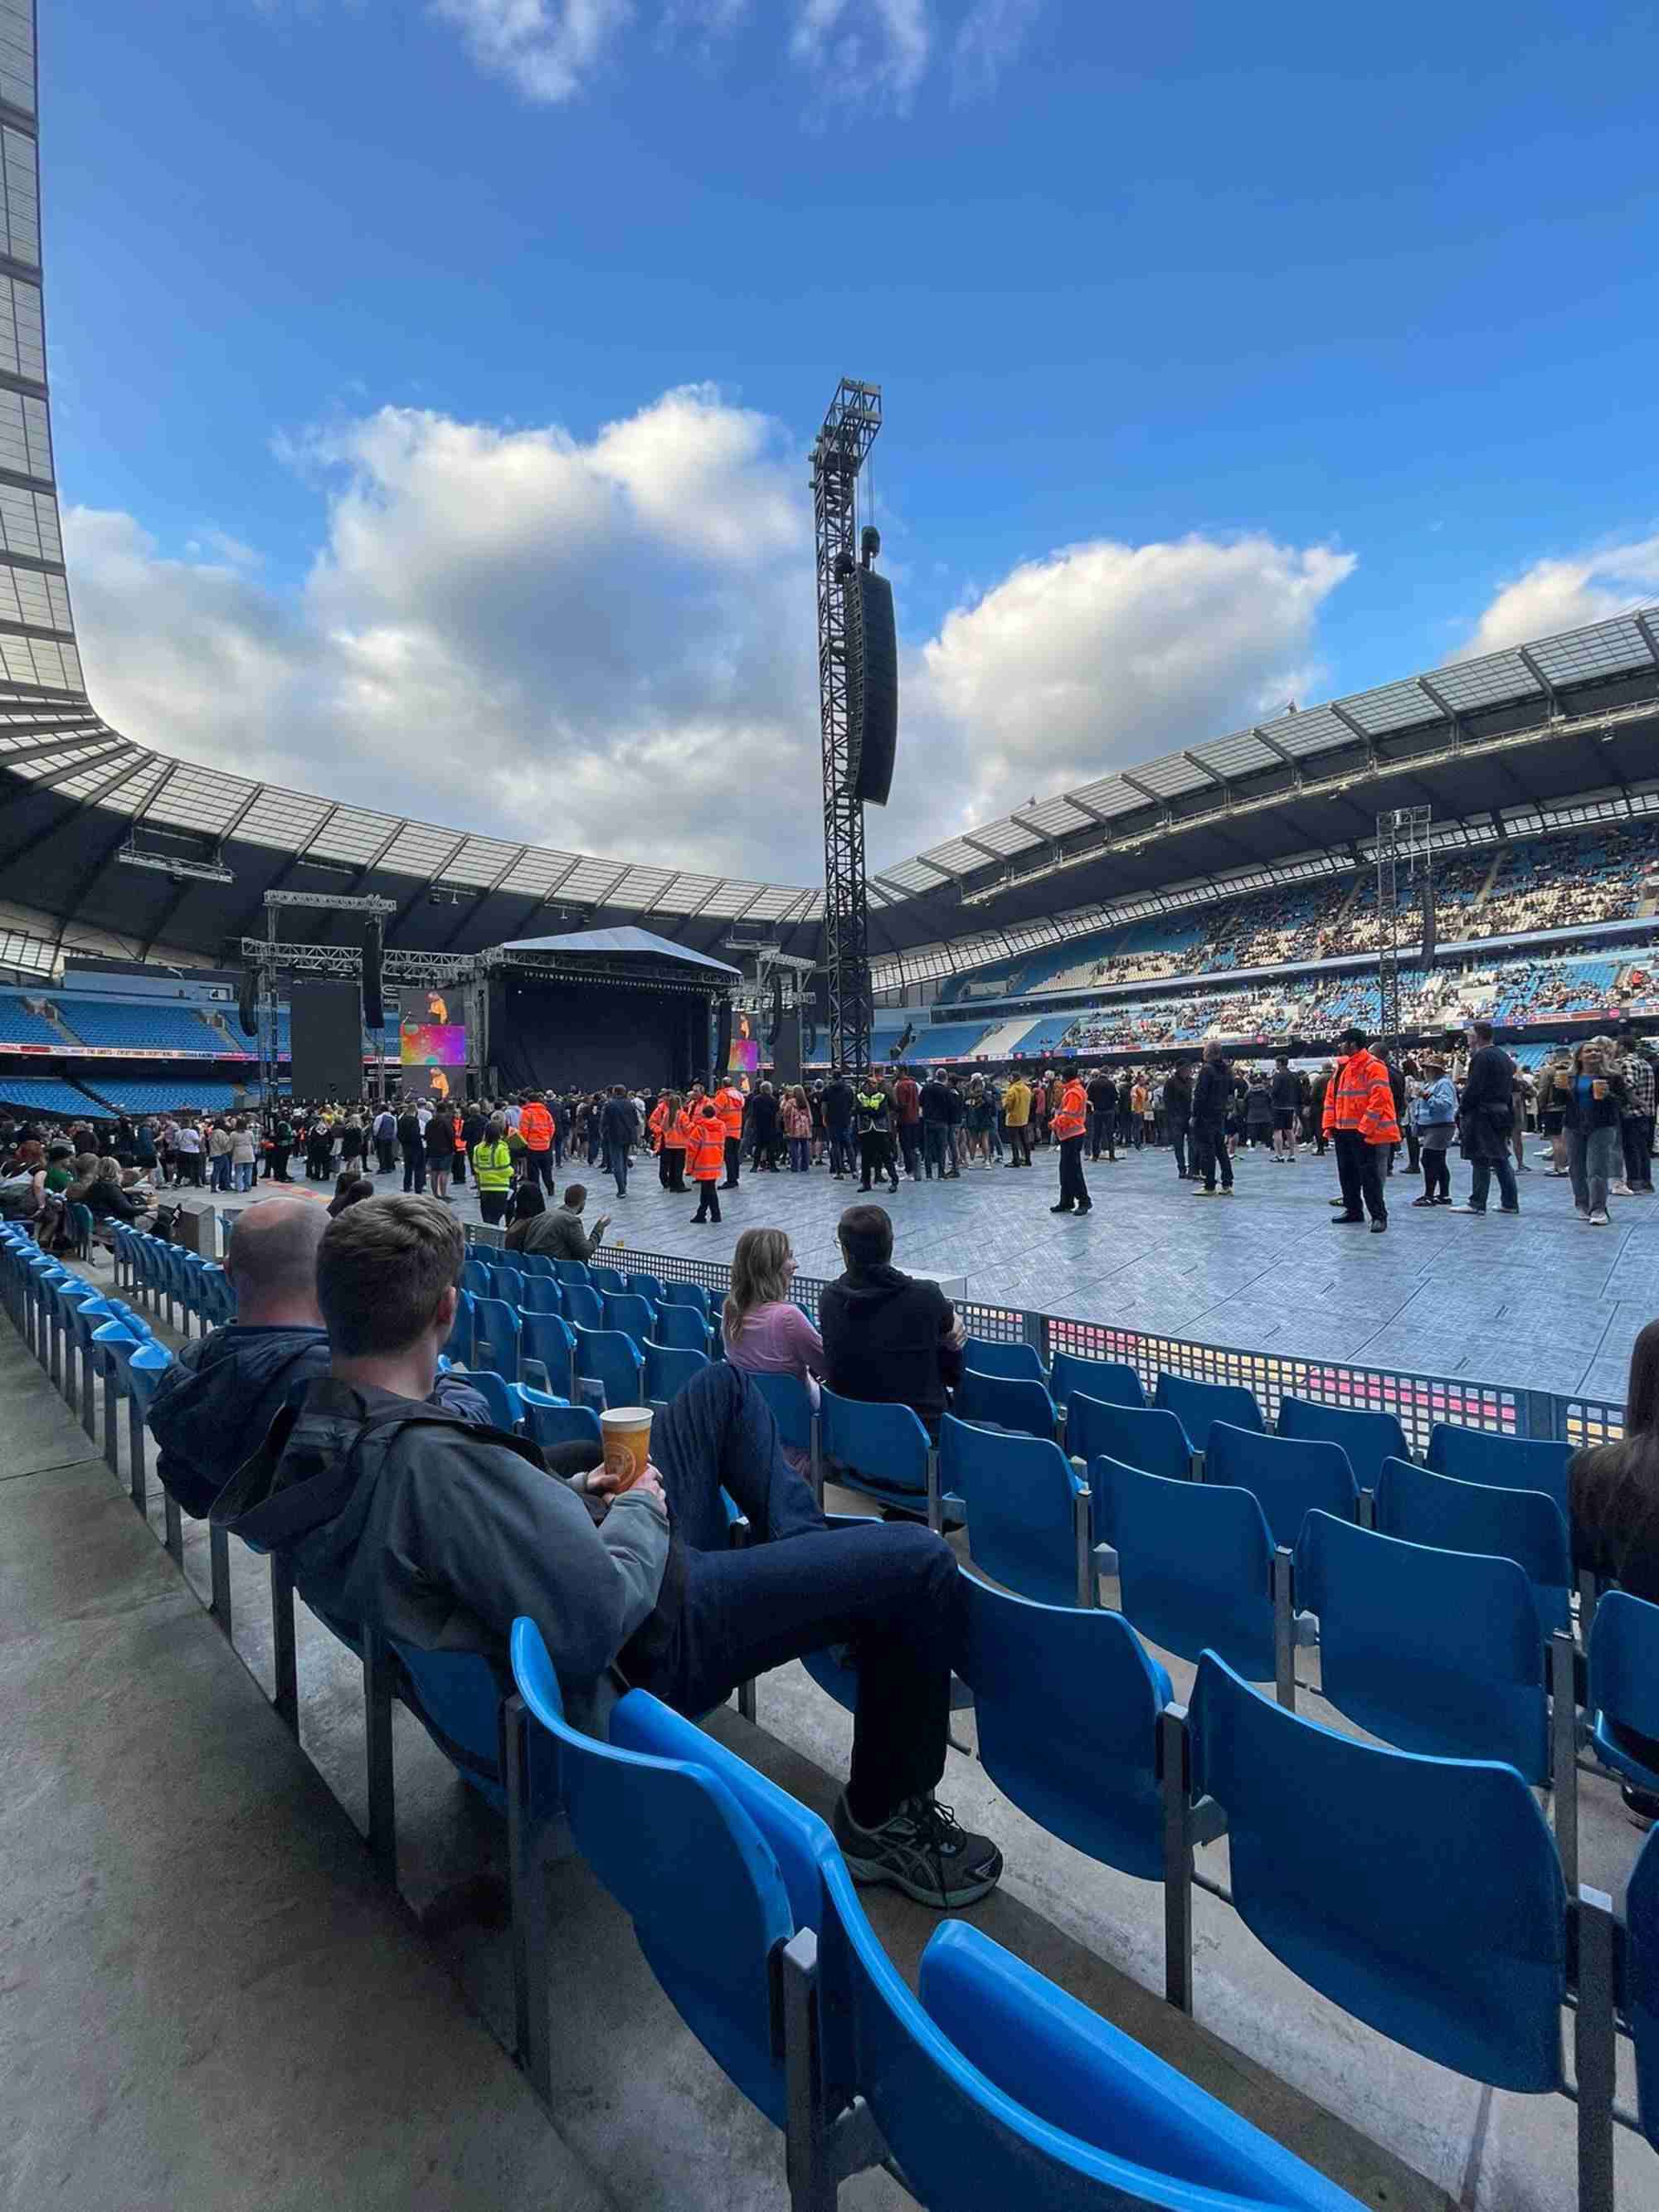 View of Liam Gallagher at Etihad Stadium Manchester from Seat Block 122